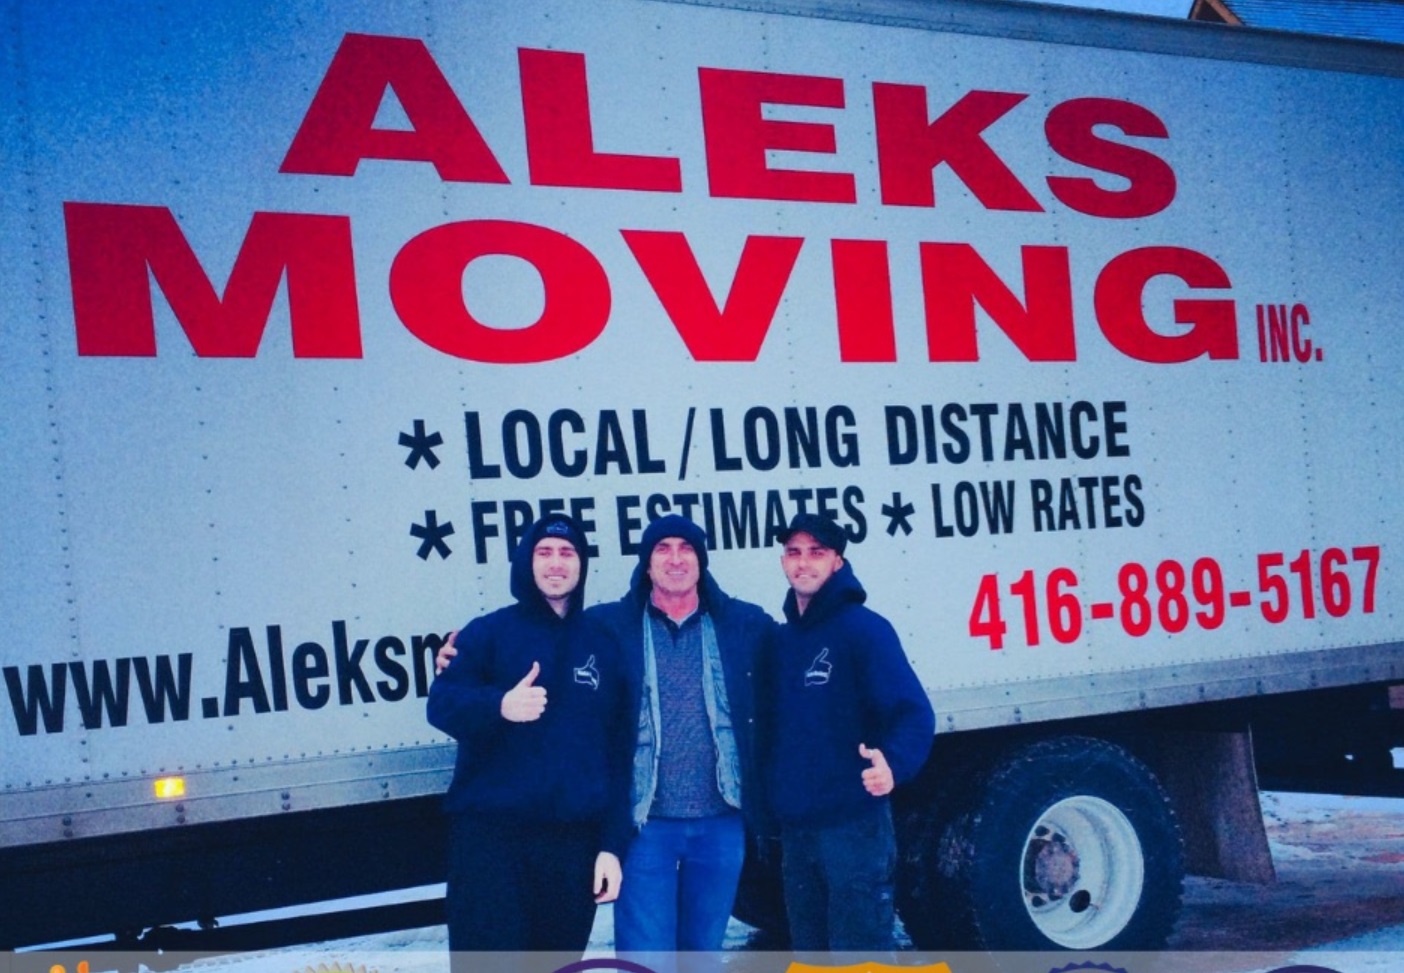 Mississauga Movers by Aleks Moving Best Move reviews